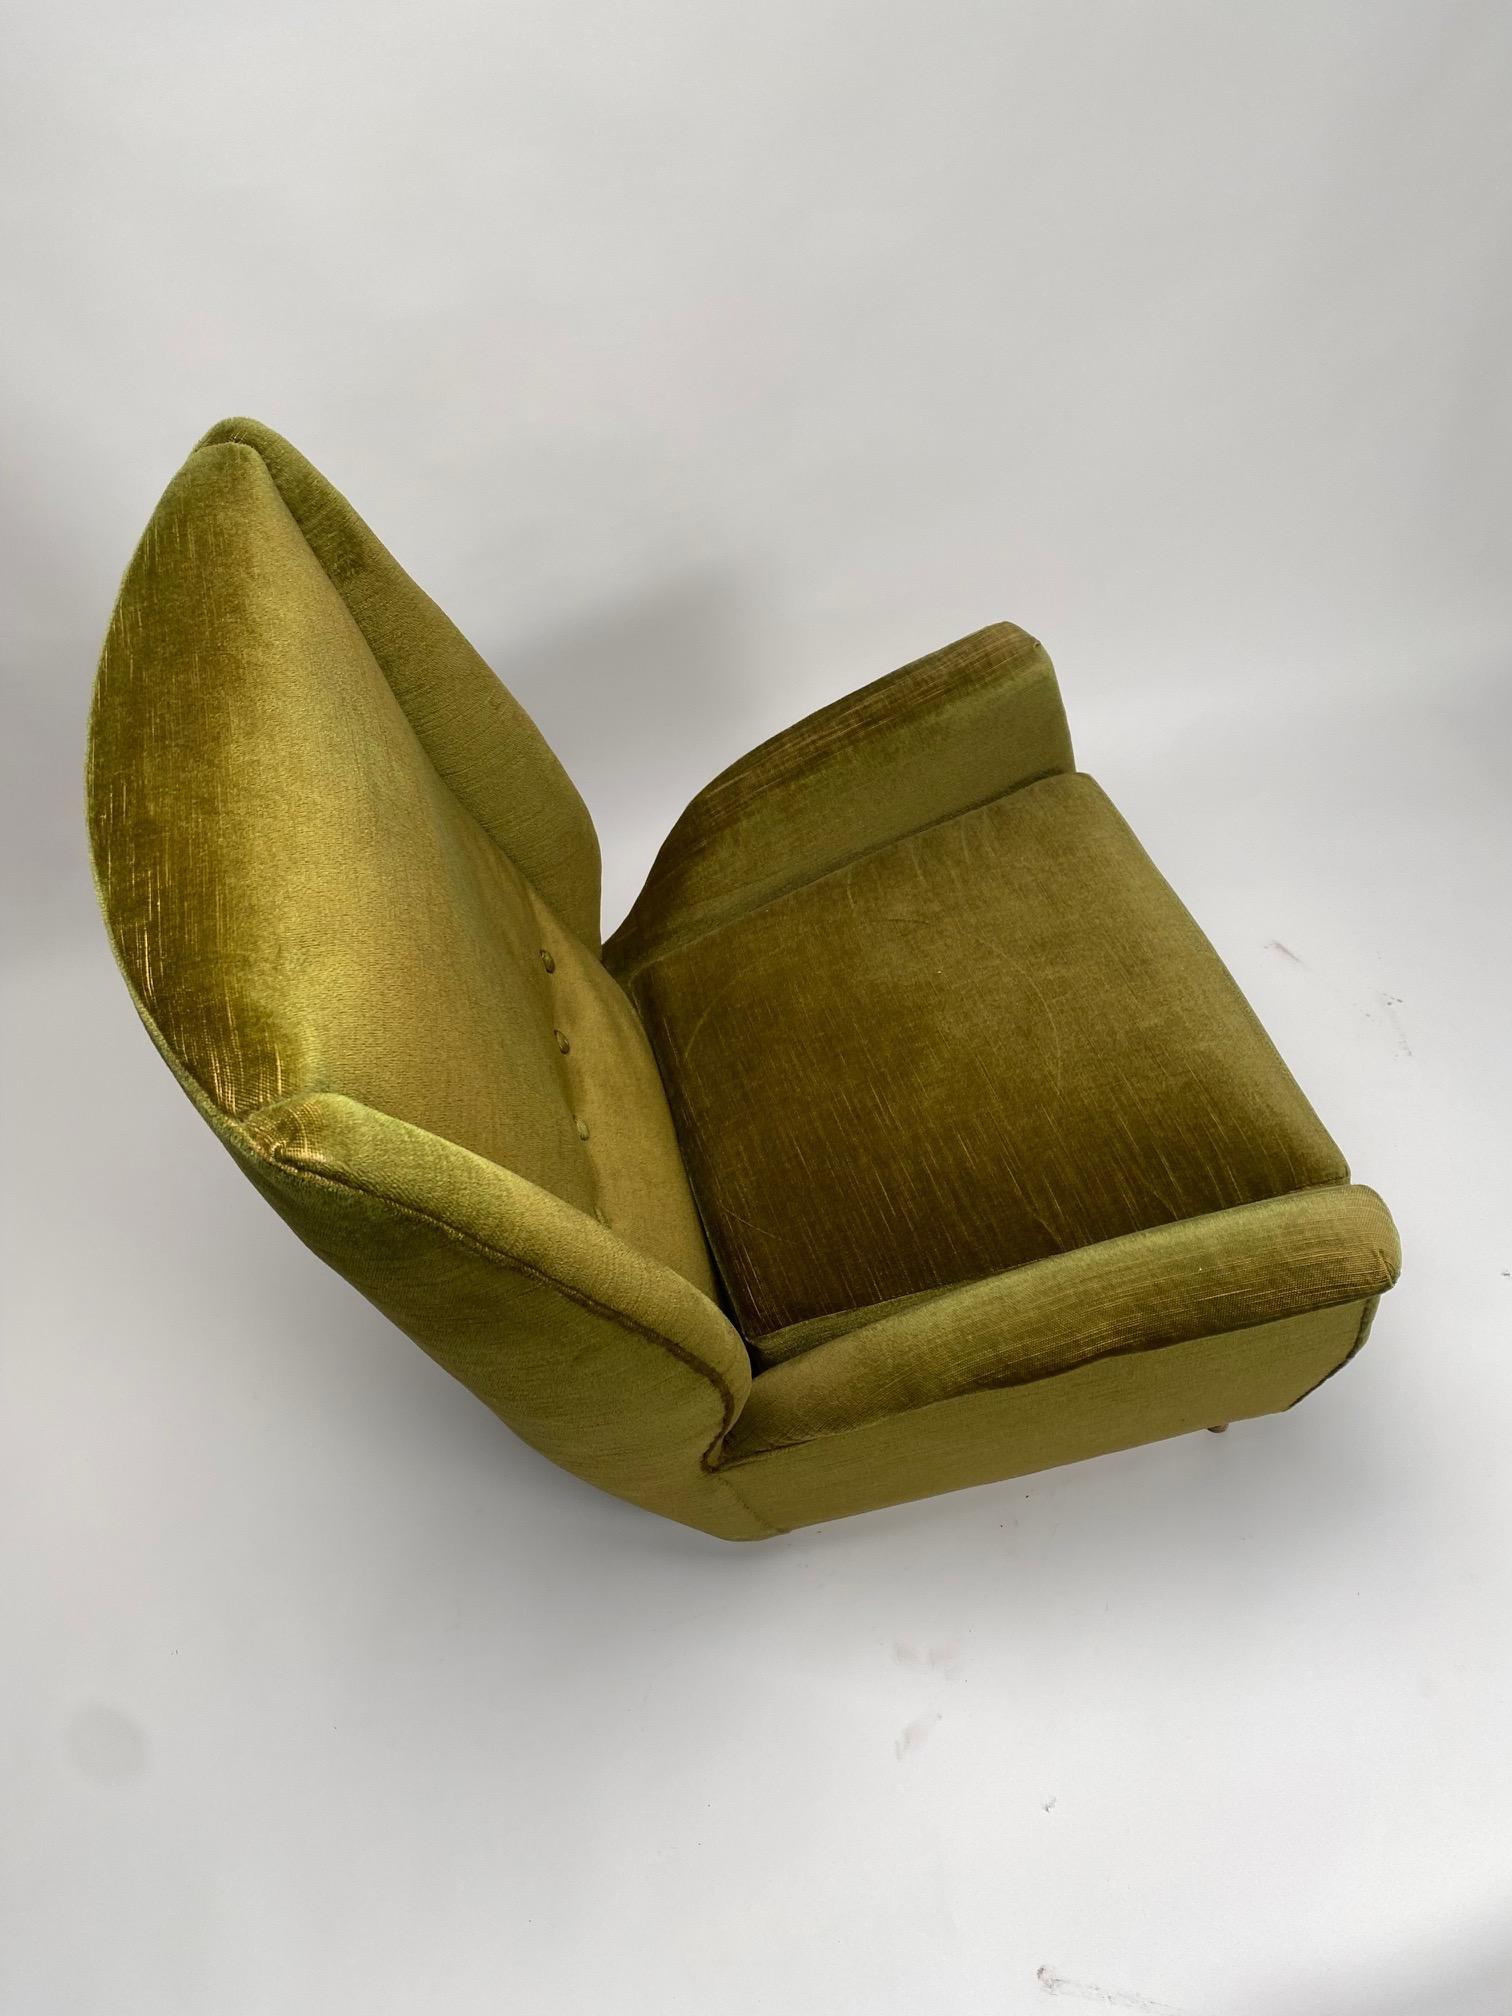 Wood Gio Ponti, rare pair of Wingback Armchairs for ISA, Italy, 1950s (customizable)